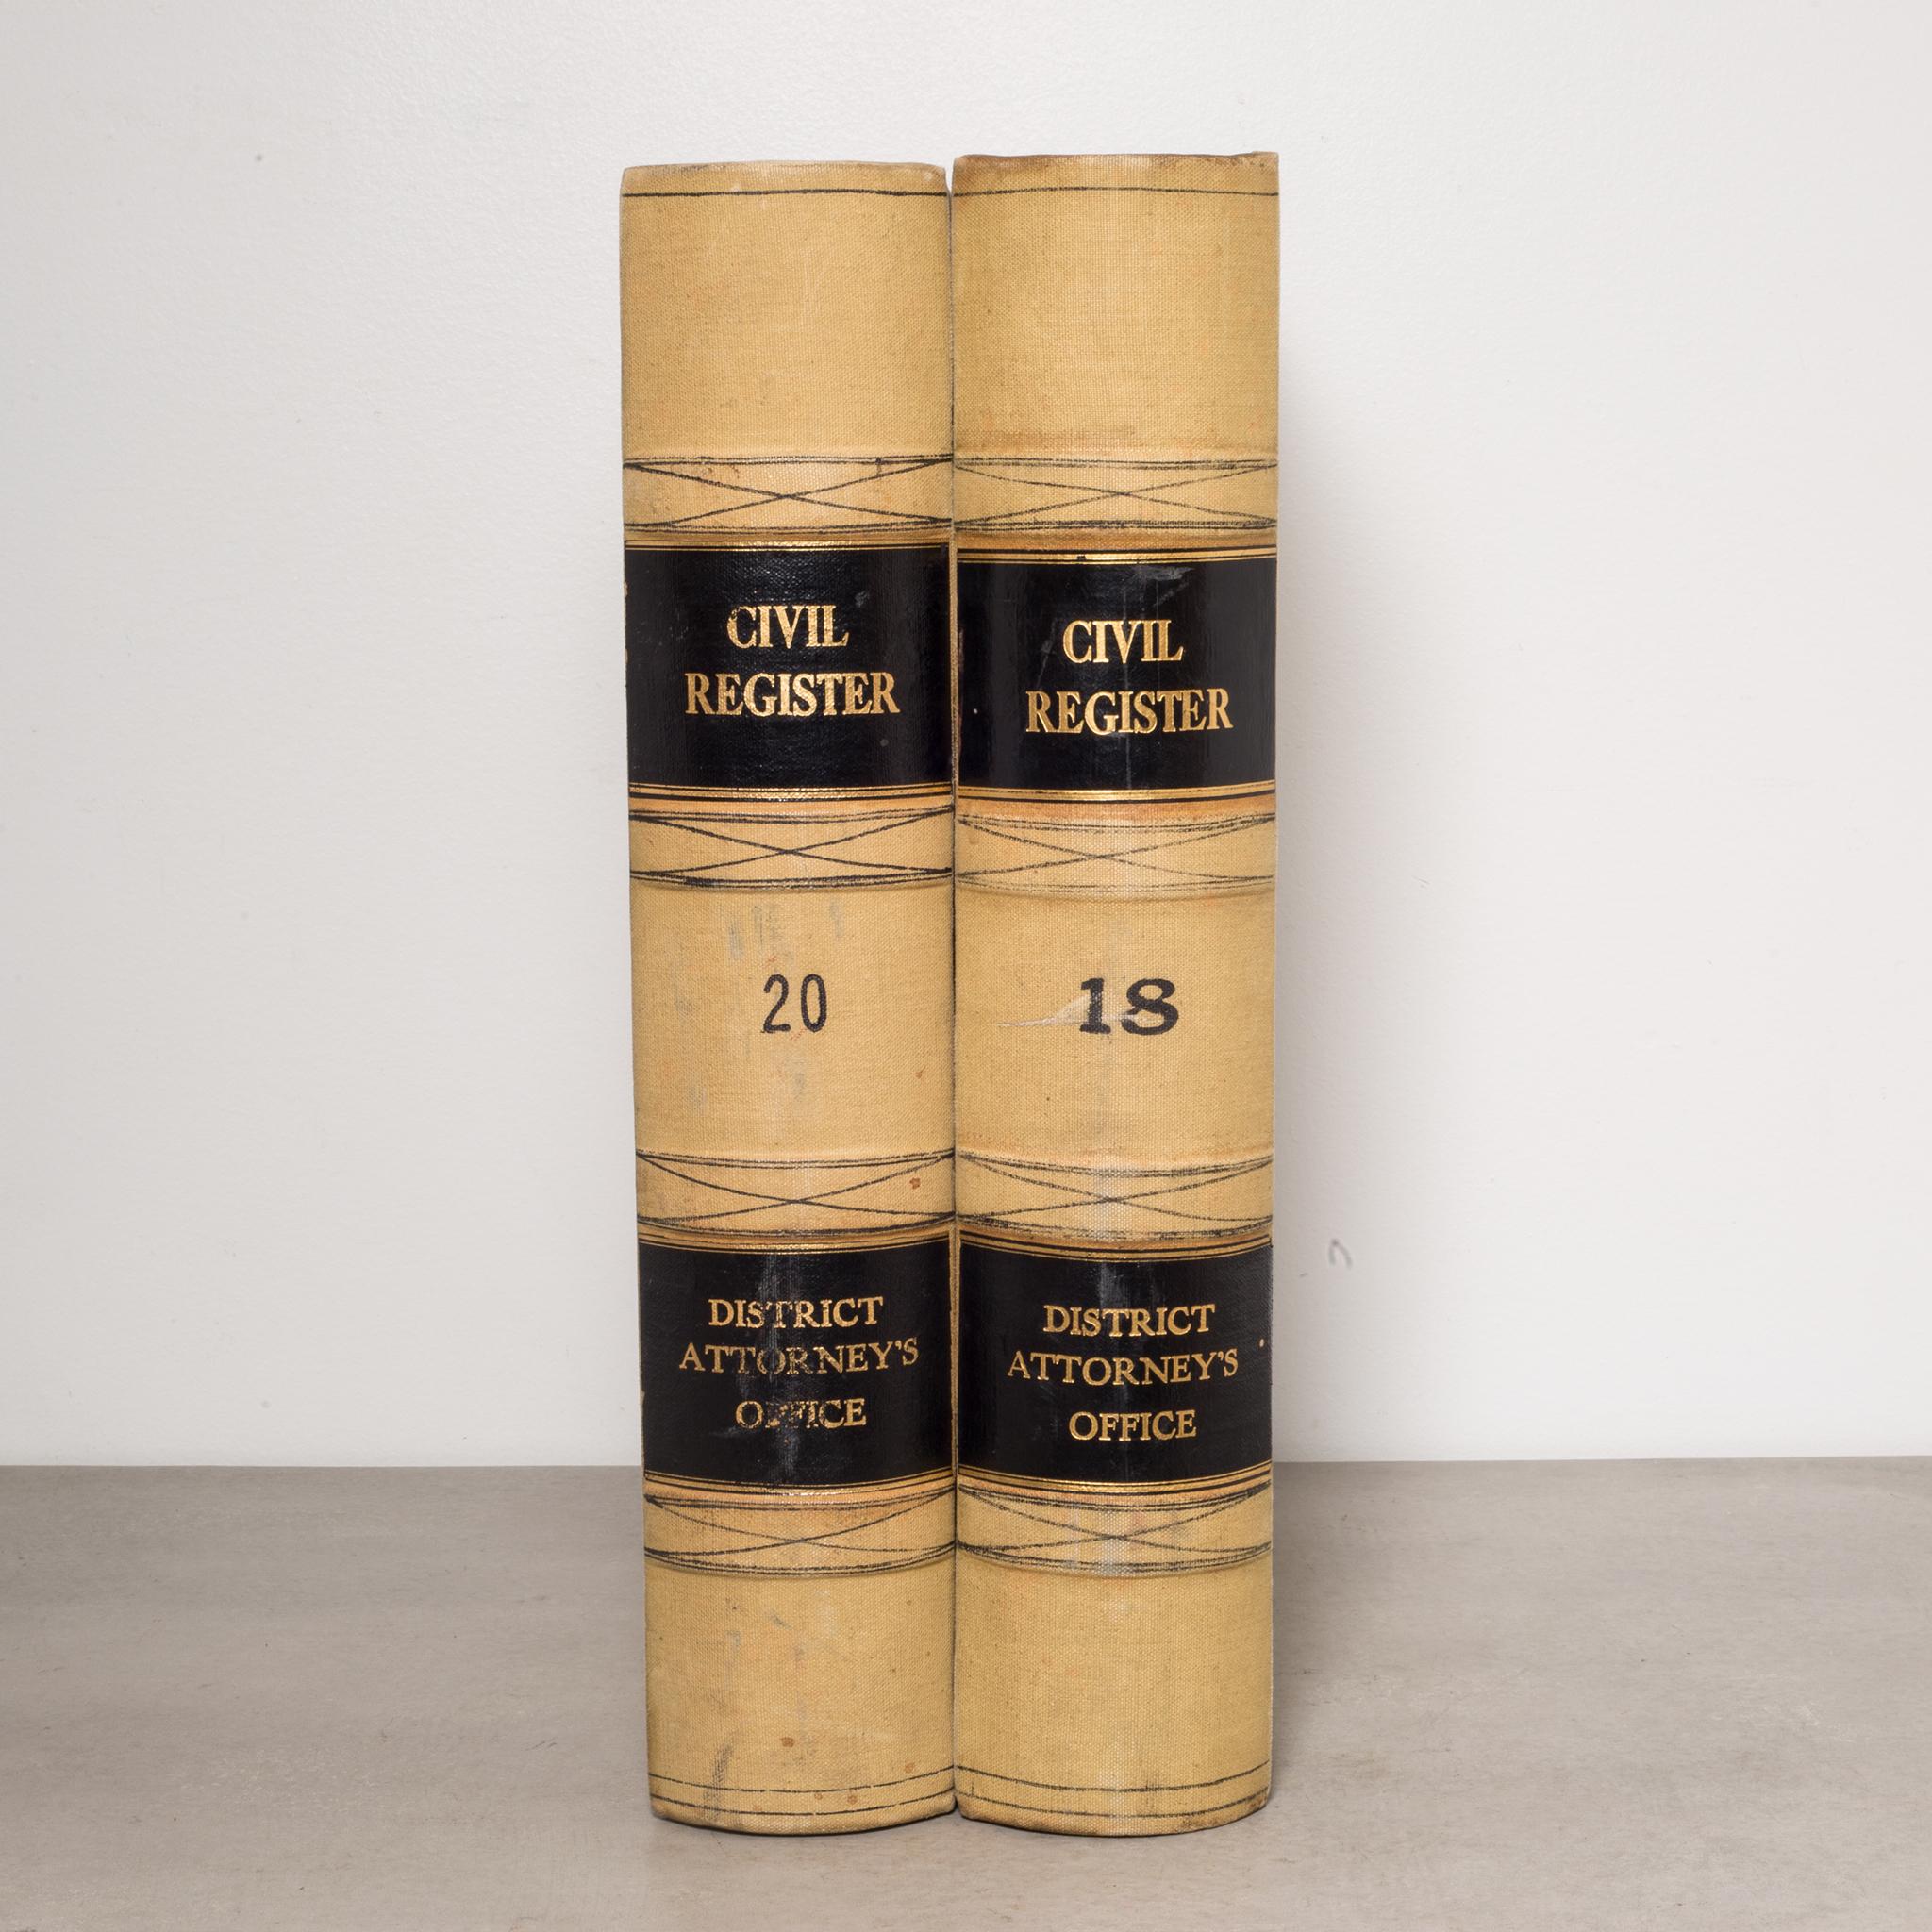 About:

This is a pair of large Civil Register books for the District Attorney's Office of Alemeda County, California. The books have alphabetical tabs for name entries in front and entries of civil suits in the body. The books are covered in a